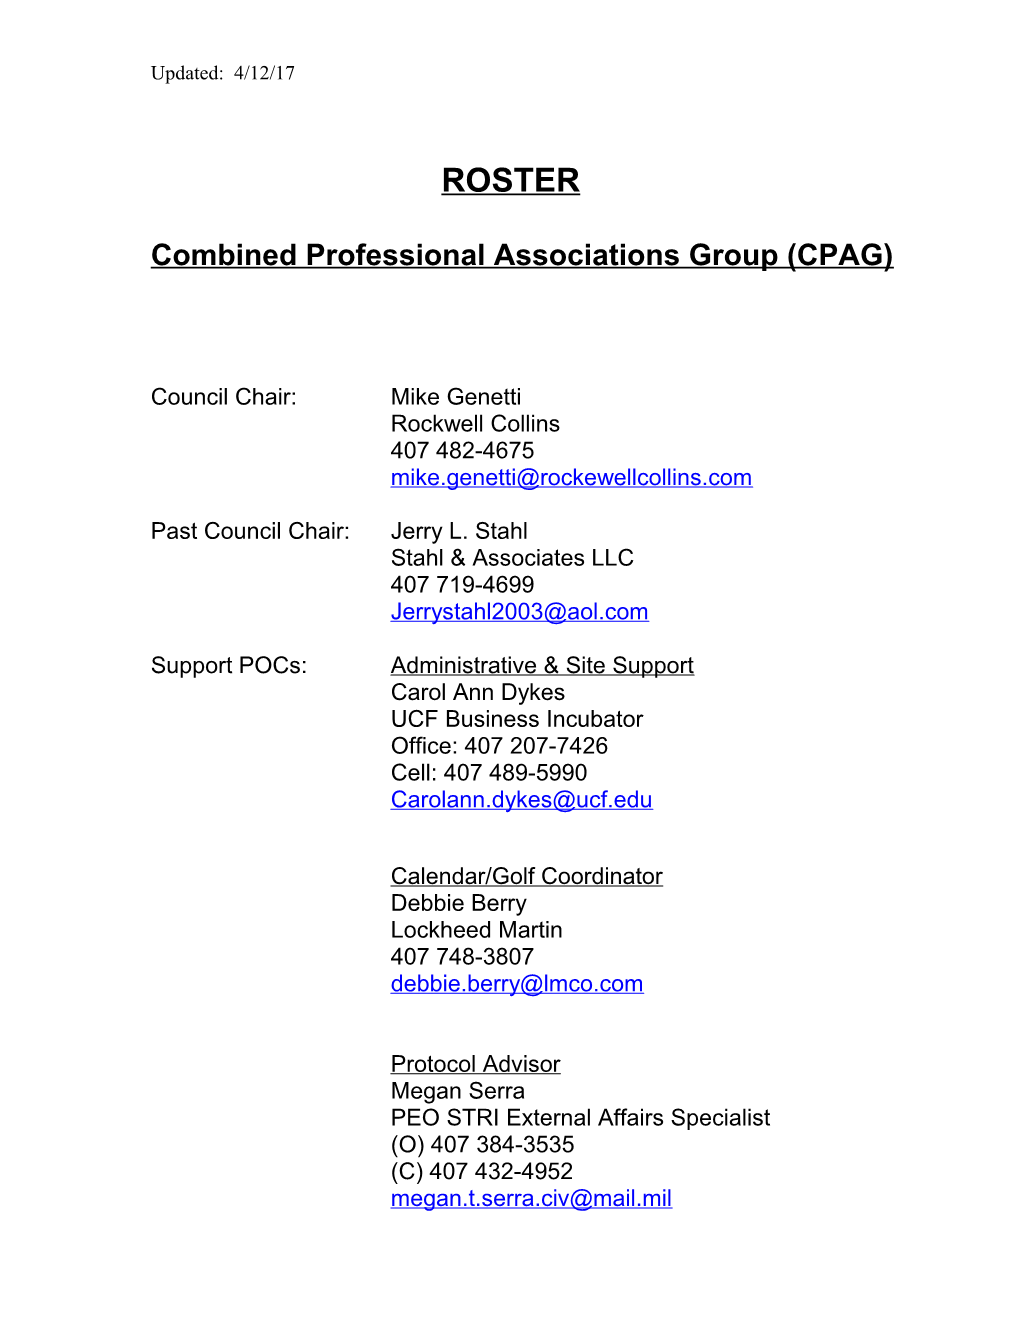 Combined Professional Associations Group (CPAG)